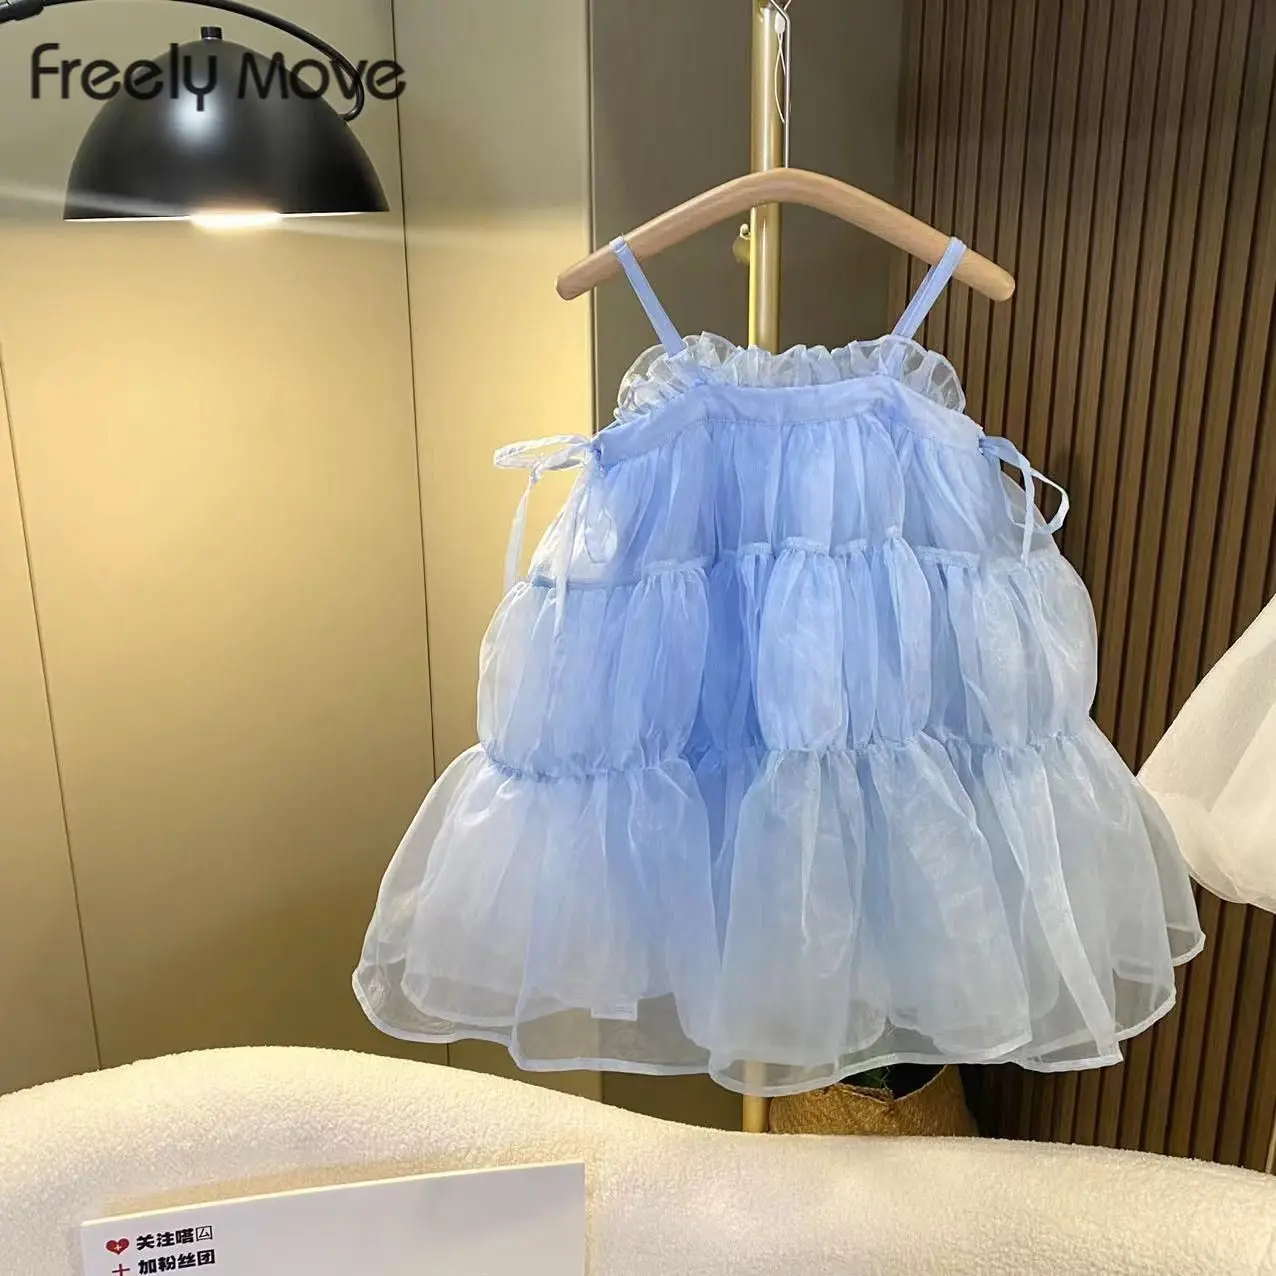 

Freely Move Vestido Girl Princess Dress Solid Summer Pleated Toddler Strapless Dress 2-6Y Baby Tutu Dresses Children Clothes